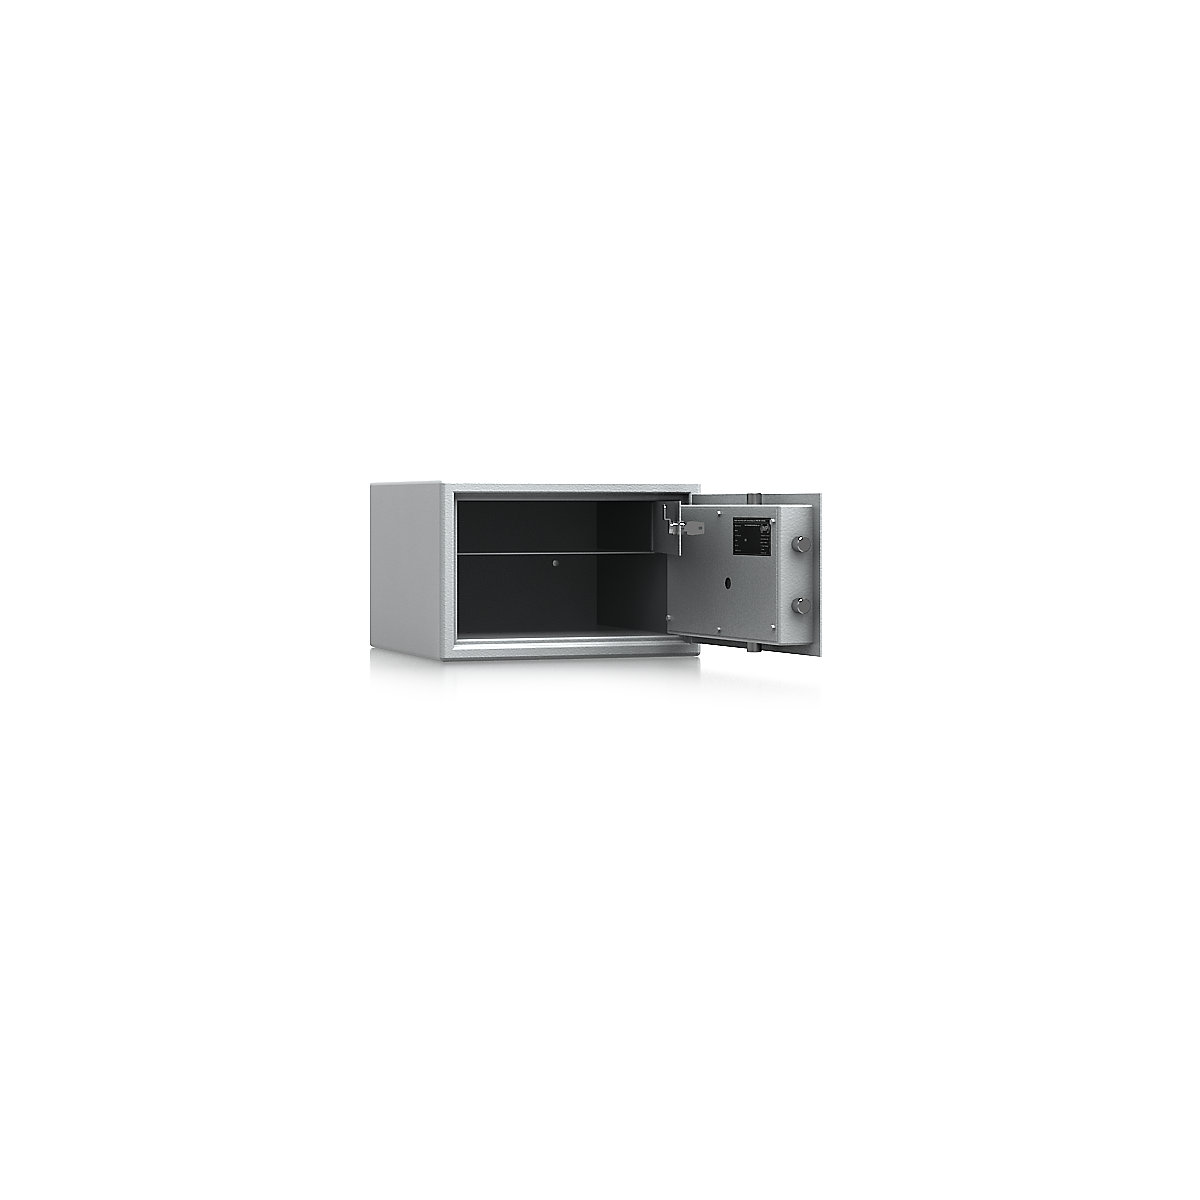 Built-in furniture safe with interior safe, VDMA B, S2, HxWxD 255 x 395 x 380 mm-7